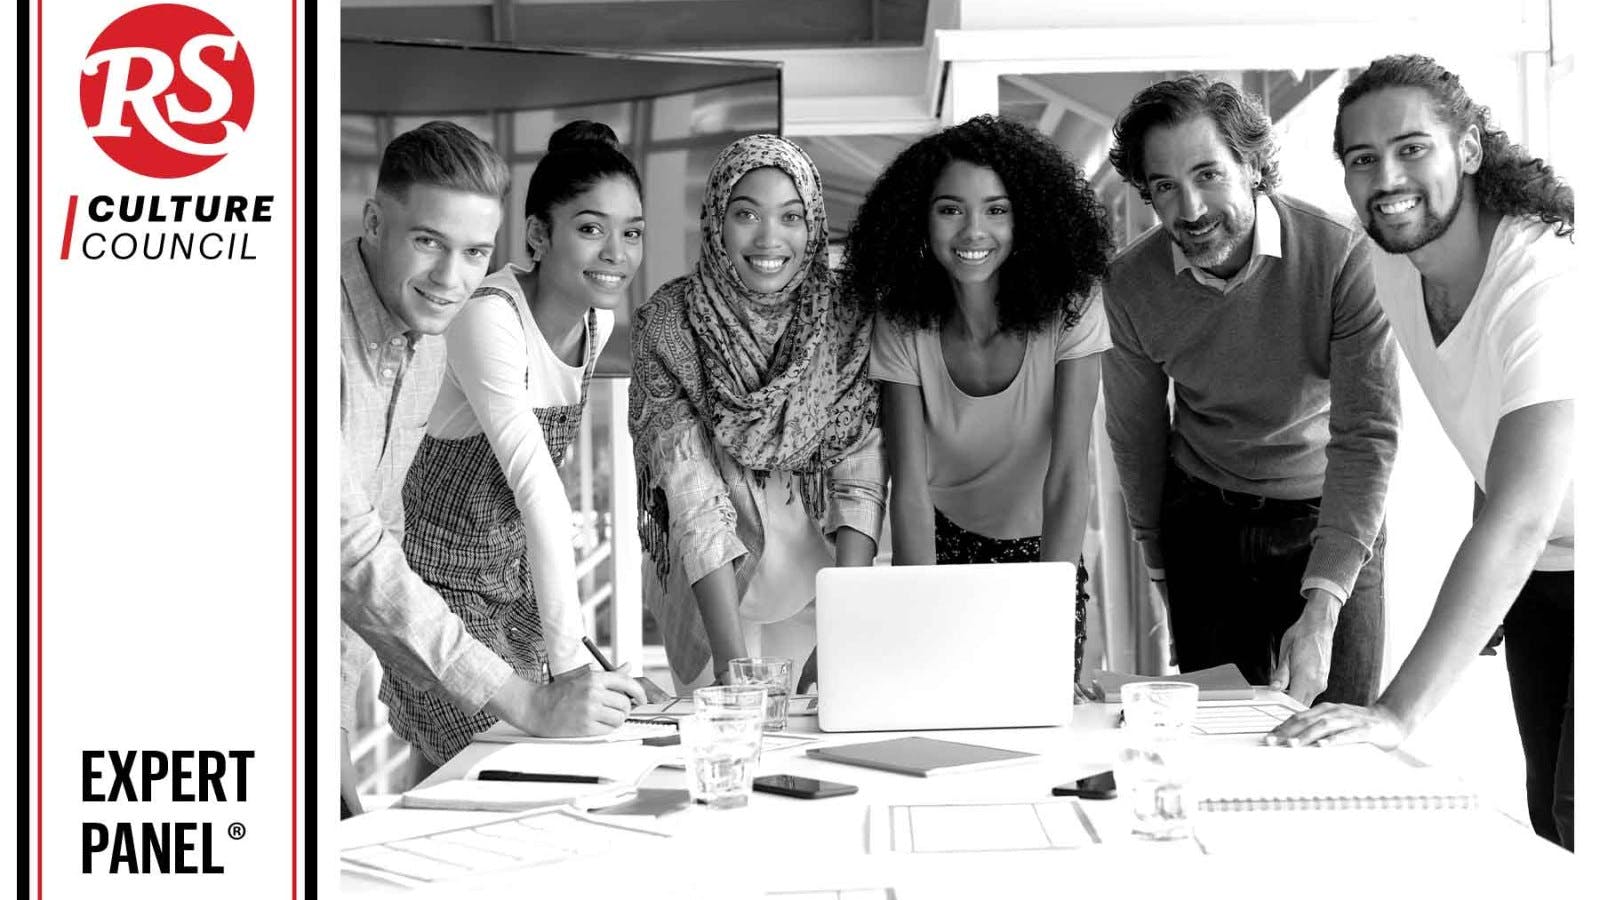 Eight Ways Marketers Can Be More Thoughtful About Diversity, Equity and Inclusion